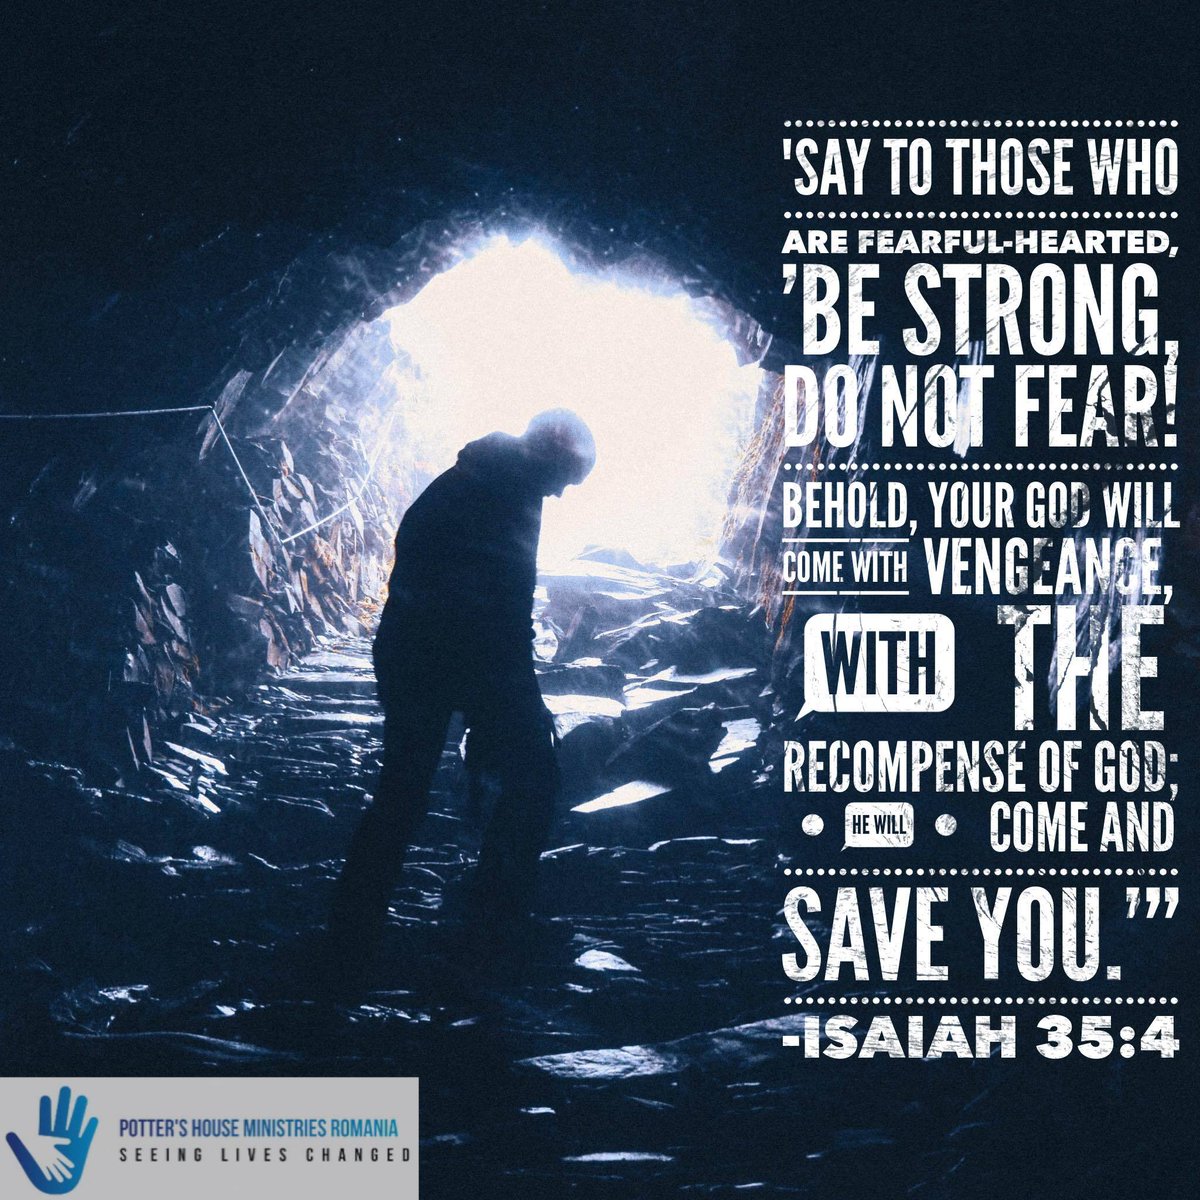 'Say to those who are fearful-hearted, 'Be strong, do not fear!  Behold, your God will come with vengeance, With the recompense of God; He will come and save you,'' Isaiah 35:4.

#Fear #GodWillRepay #LoveGod #BibleVerse #Isaiah35